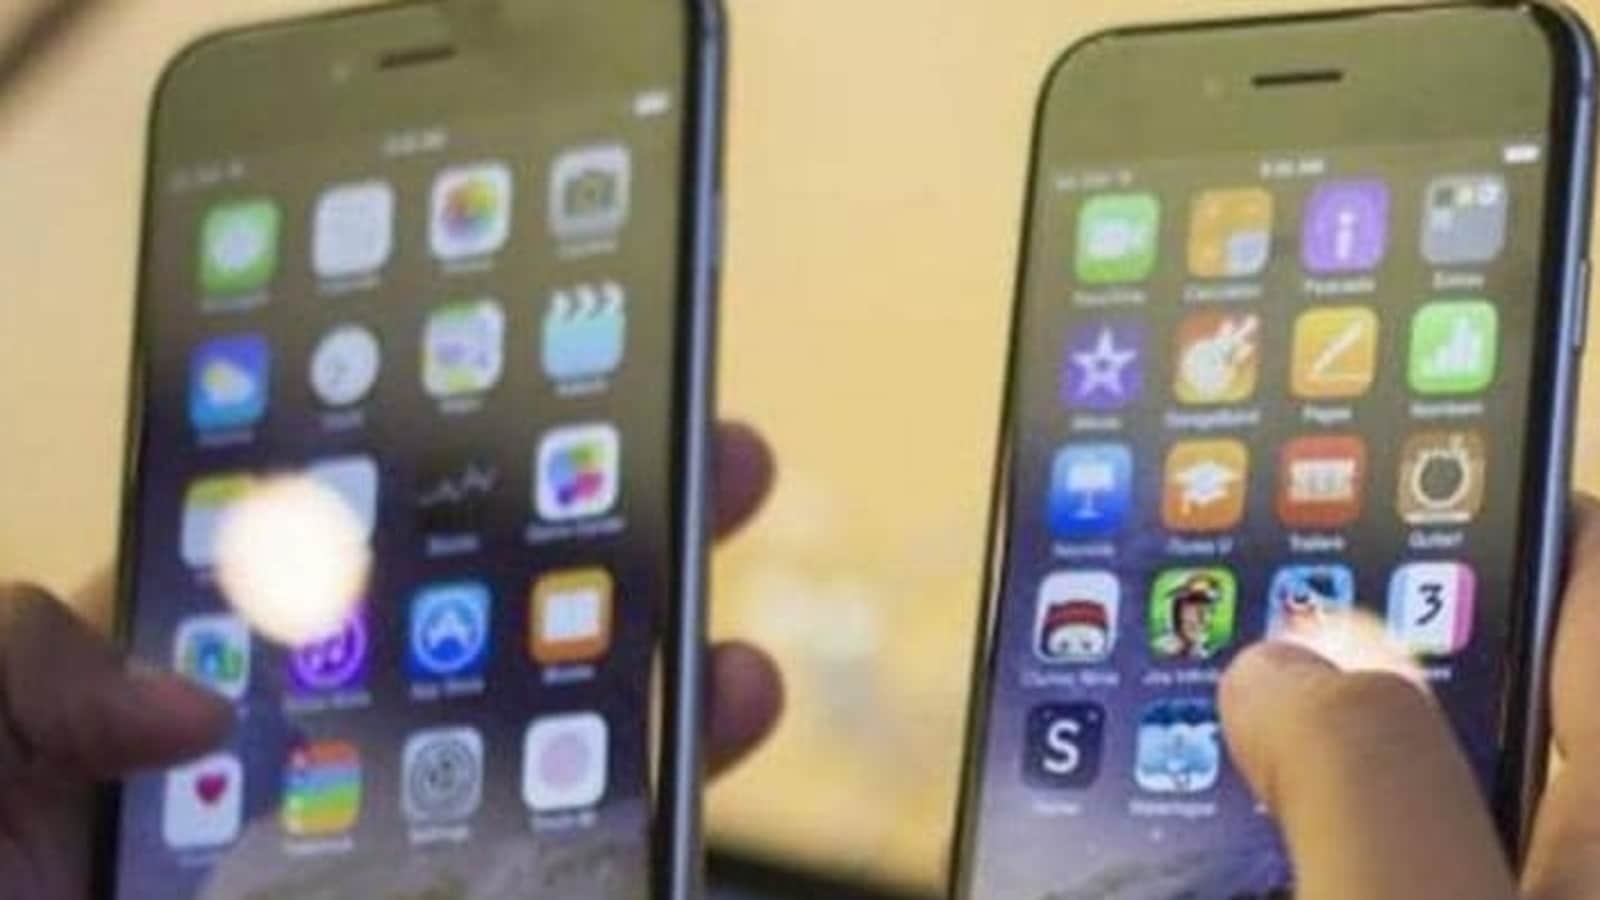 Flashback: the iPhone 6 introduced a new design in 2014 that still lives -   news